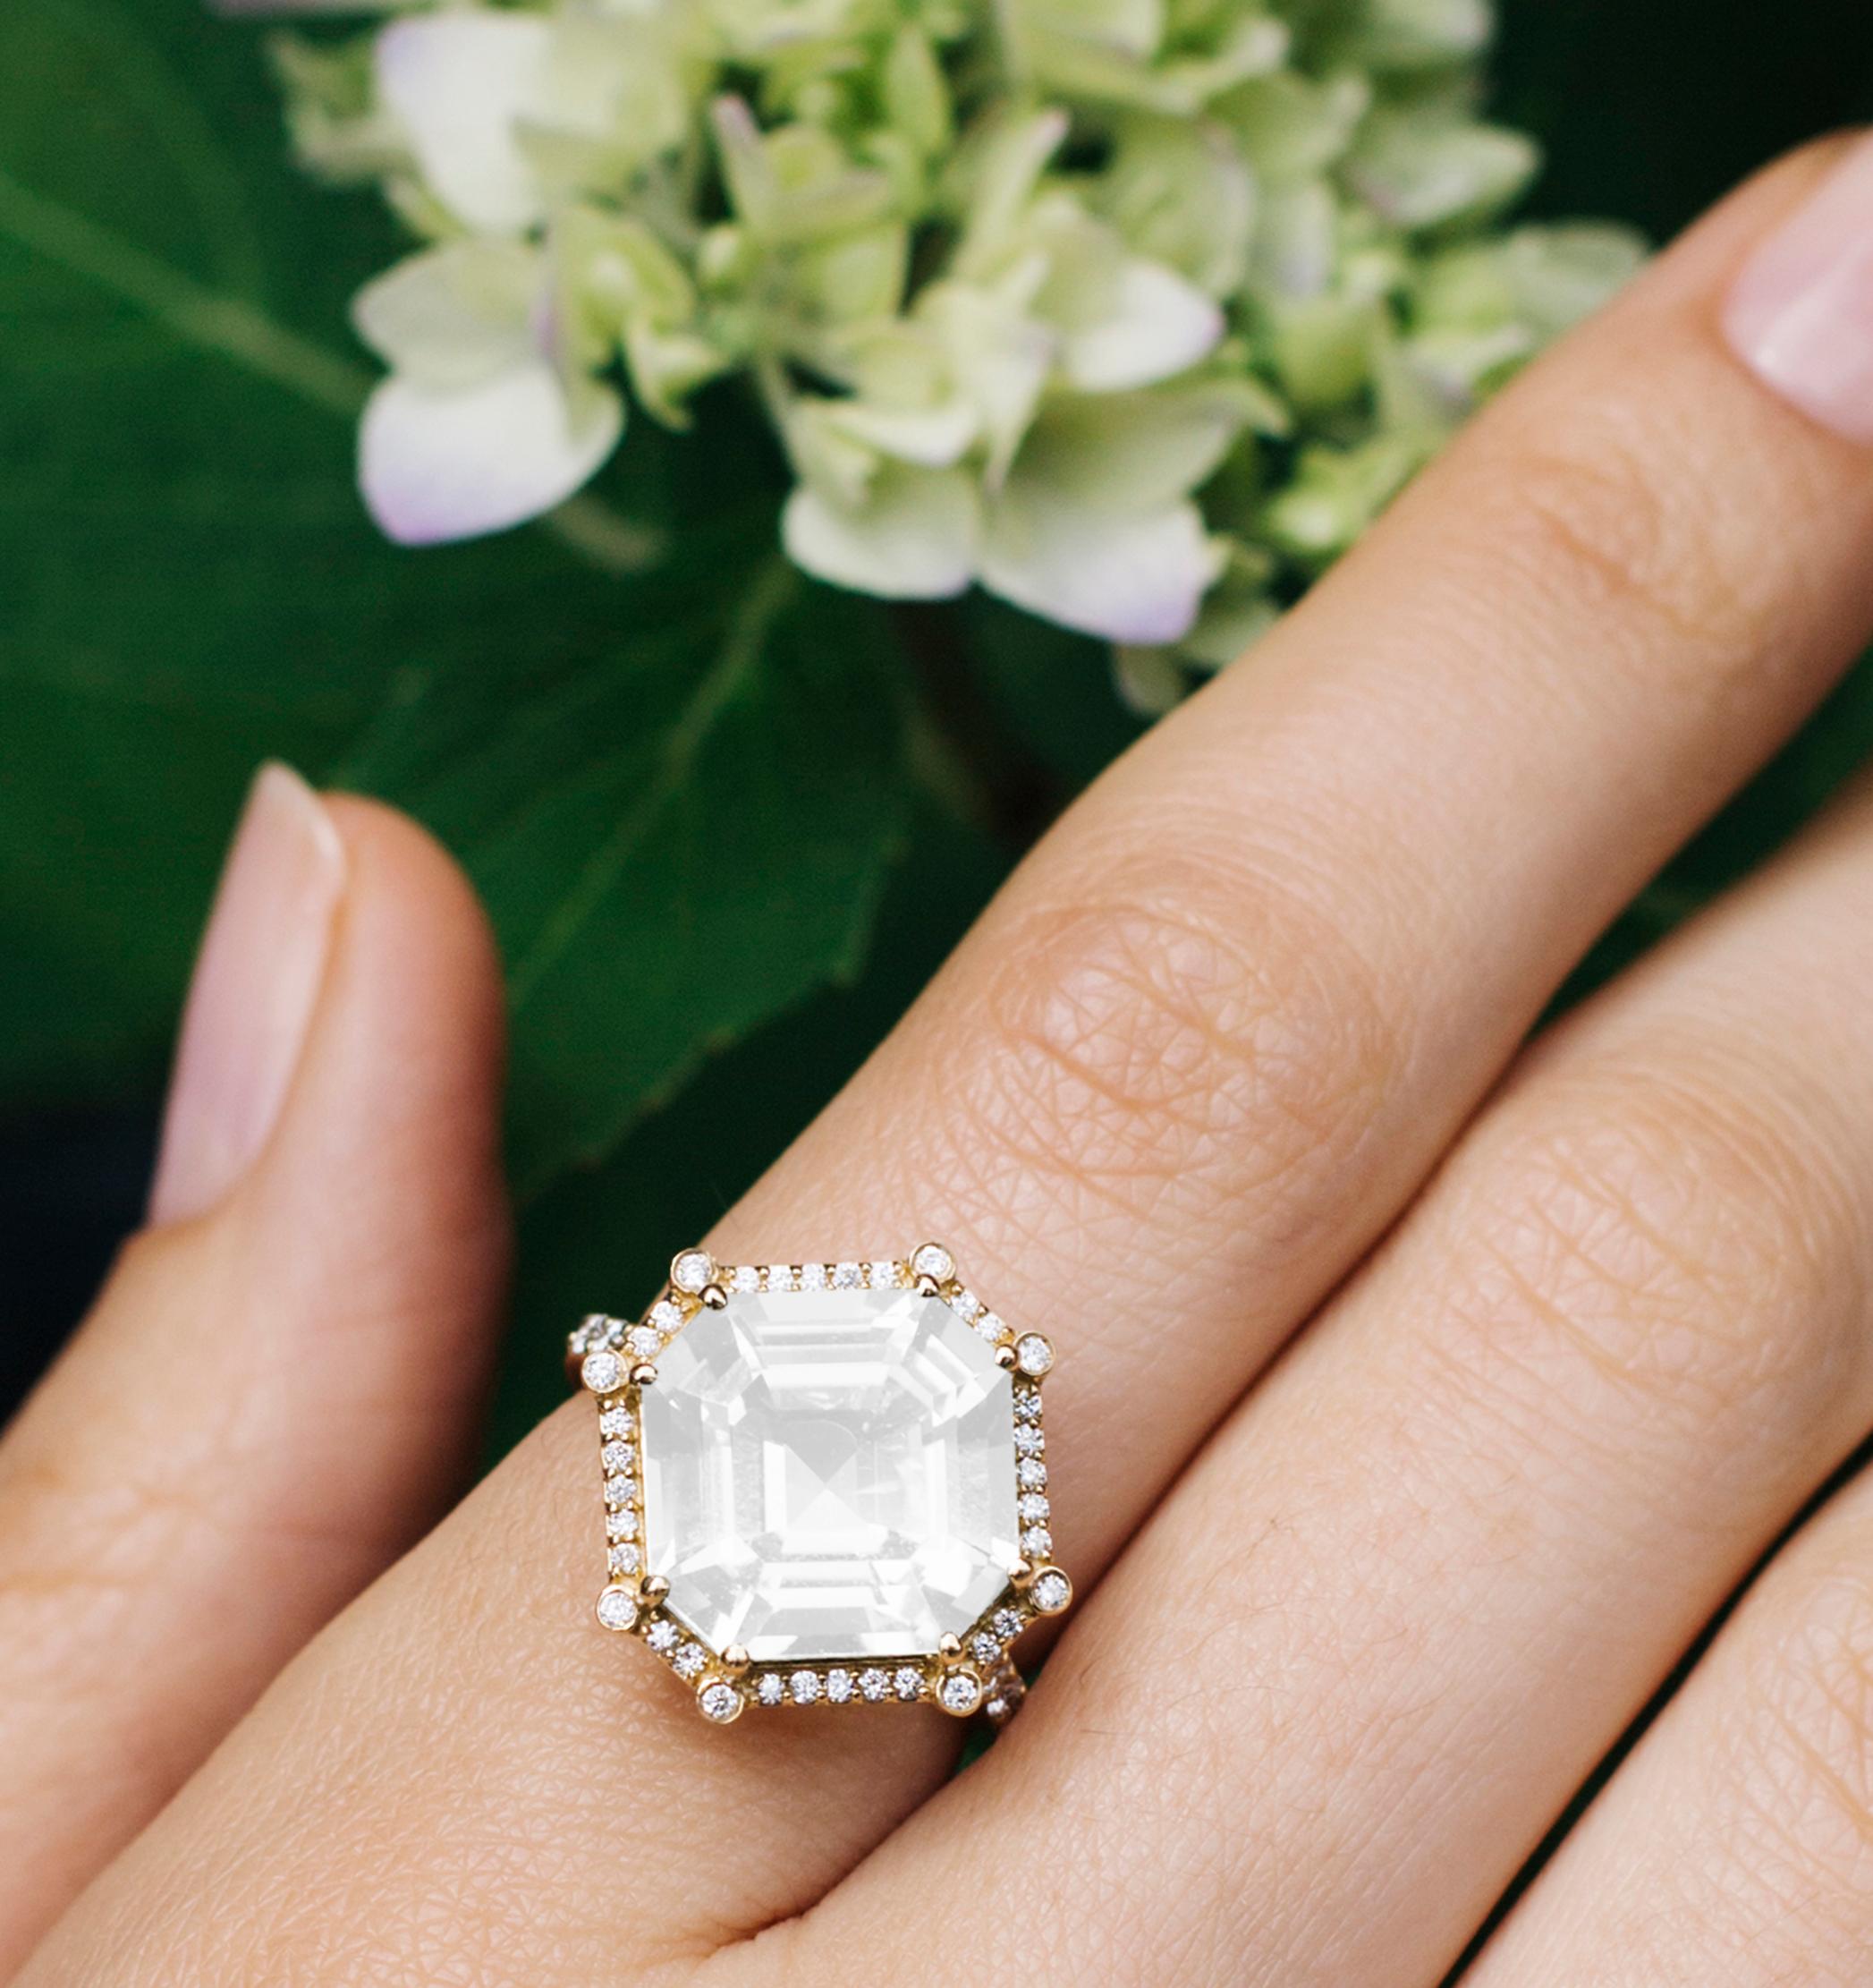 Moon Quartz Emerald Cut Asscher Ring in 18K Yellow Gold with Diamonds, from 'Gossip' Collection. 
Please allow 5-6 weeks for this item to be delivered. 

Stone Size: 12 x 12 mm

Gemstone Approx. Wt: Moon Quartz- 7.27 Carats

Diamonds: G-H / VS,